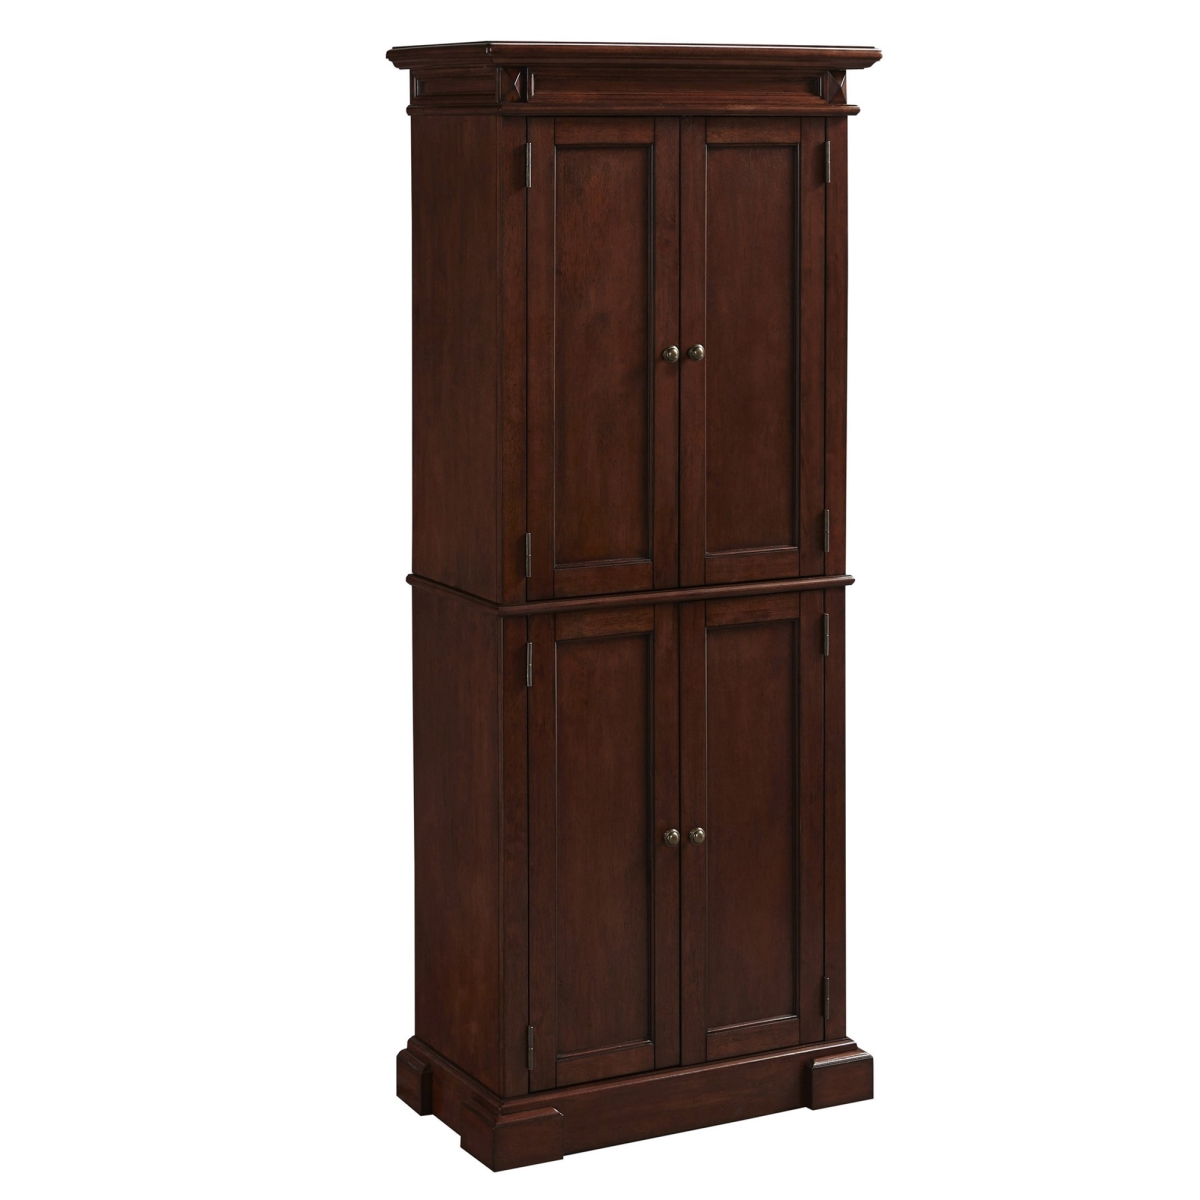 Picture of Homestyles 5005-69 Montauk Pantry, Brown - 72 x 29.75 x 16 in.